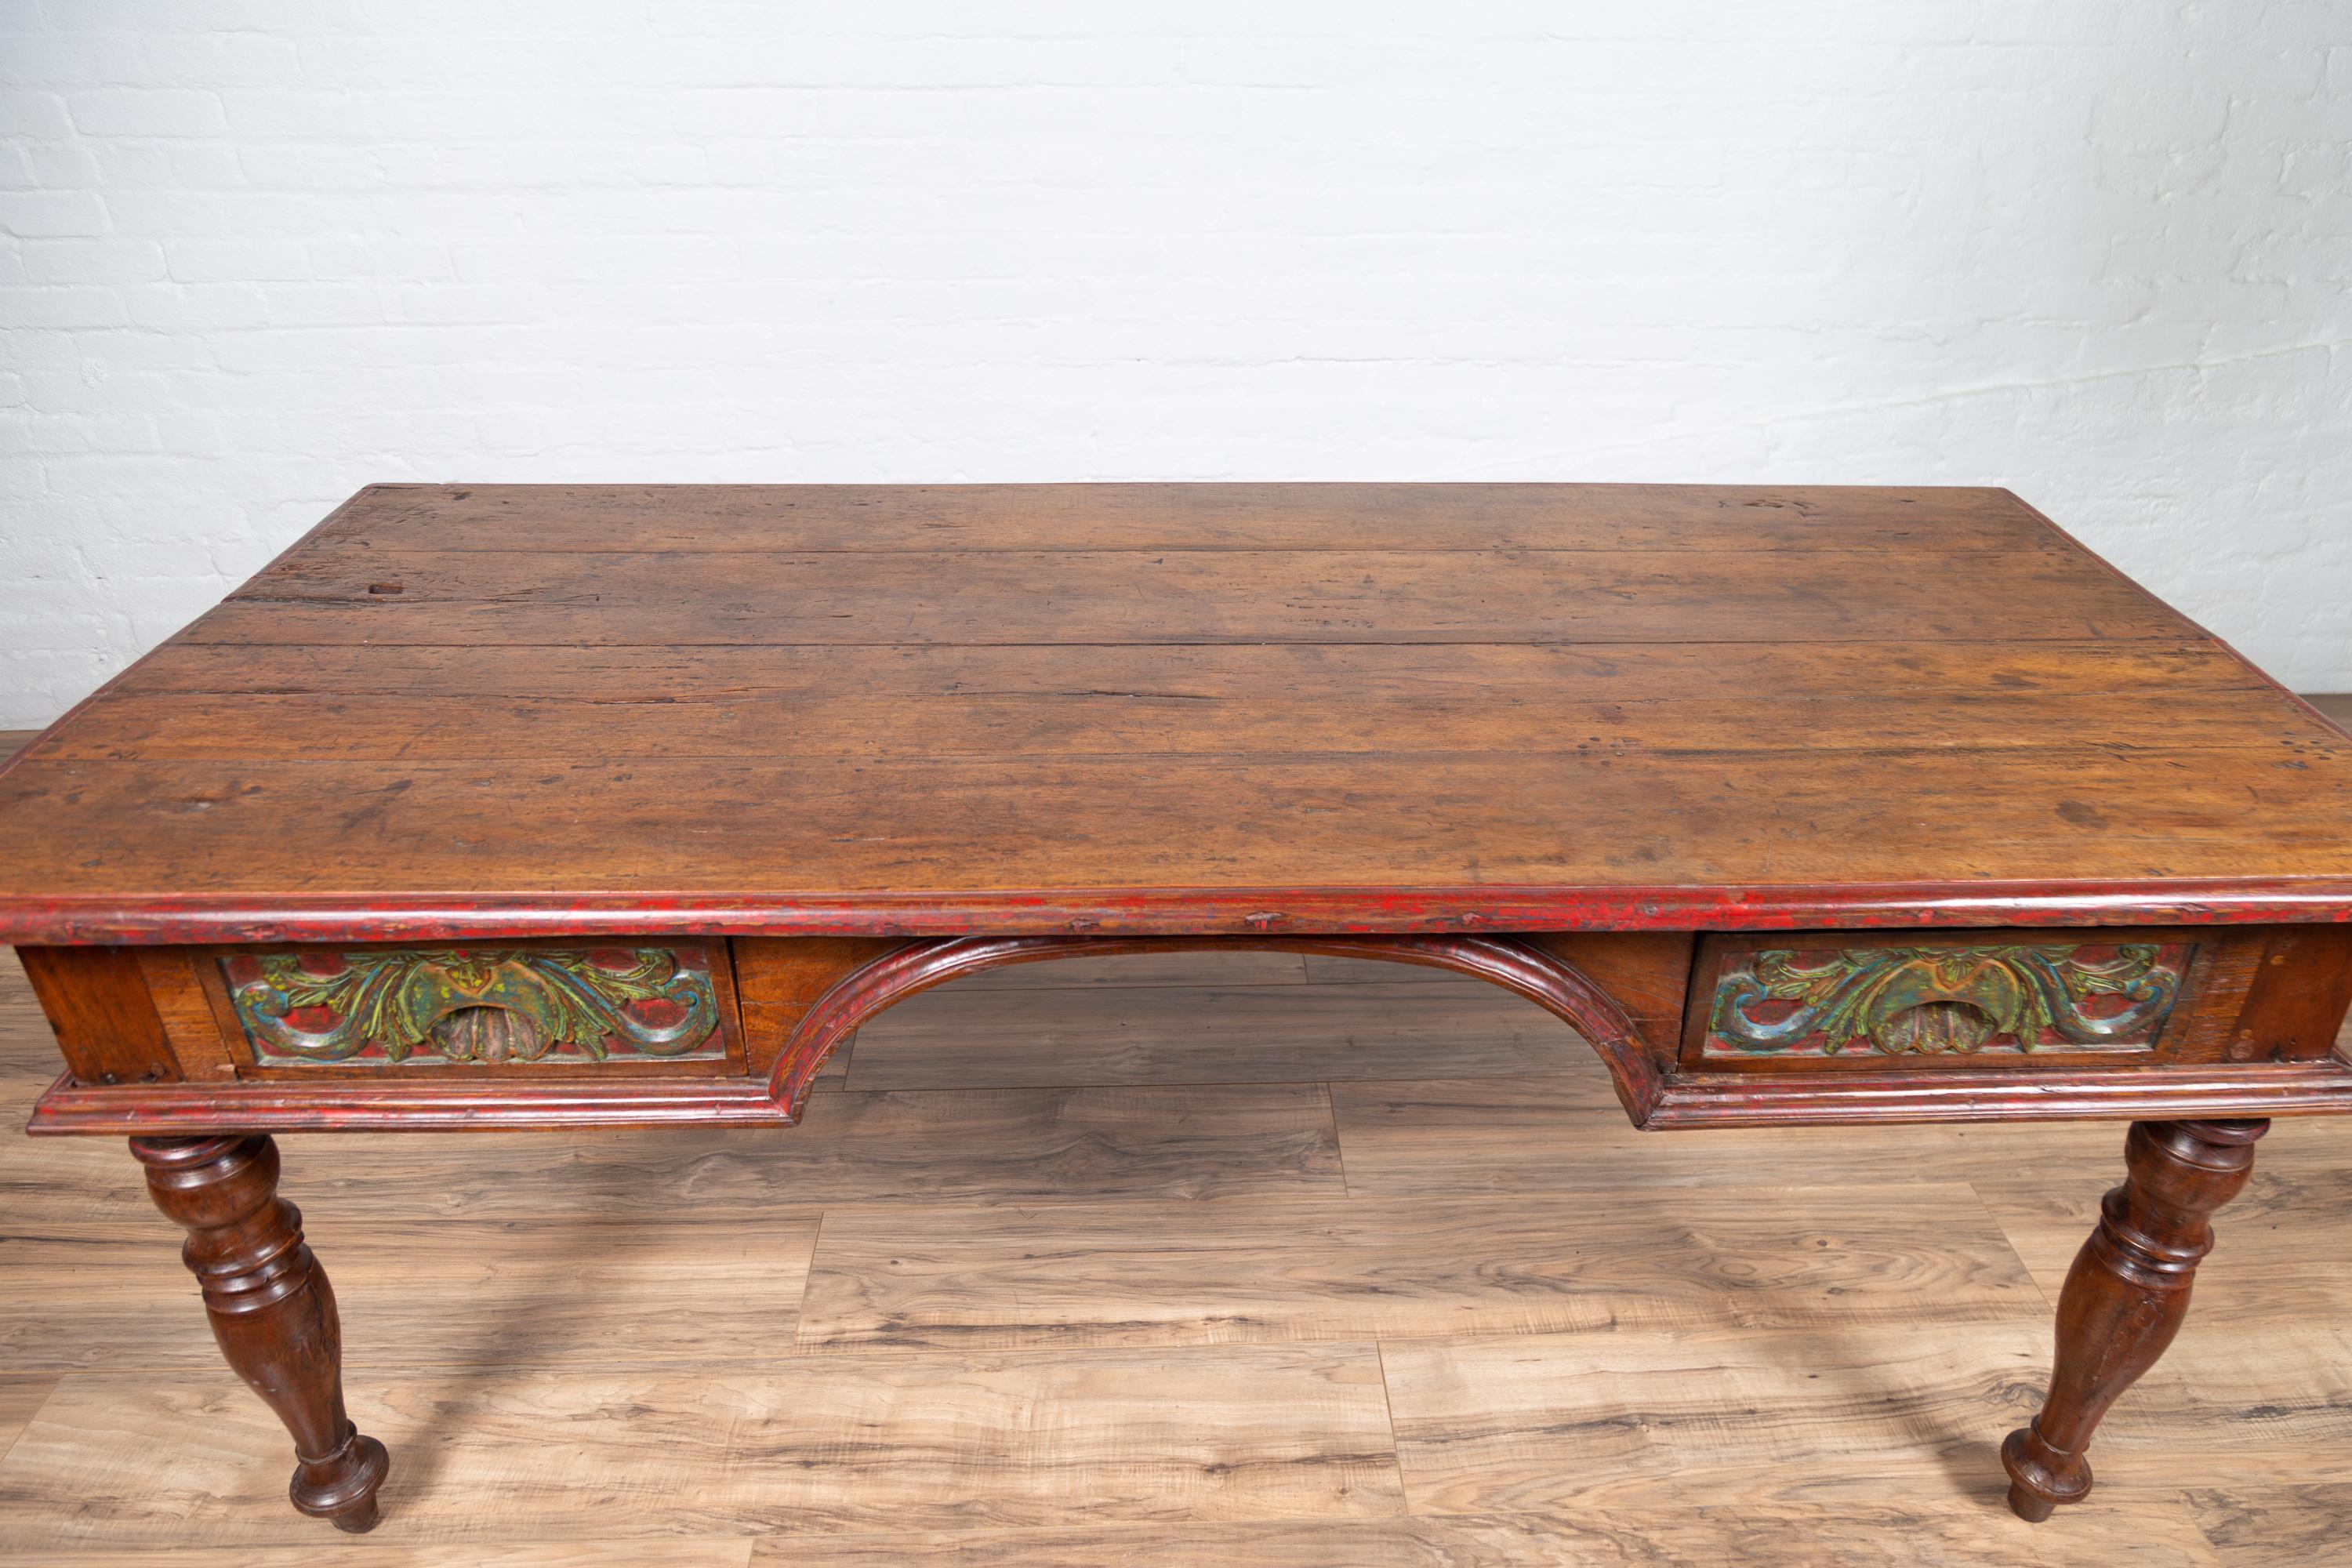 20th Century Antique Javanese Kneehole Desk with Polychrome Finish, Drawers and Carved Decor